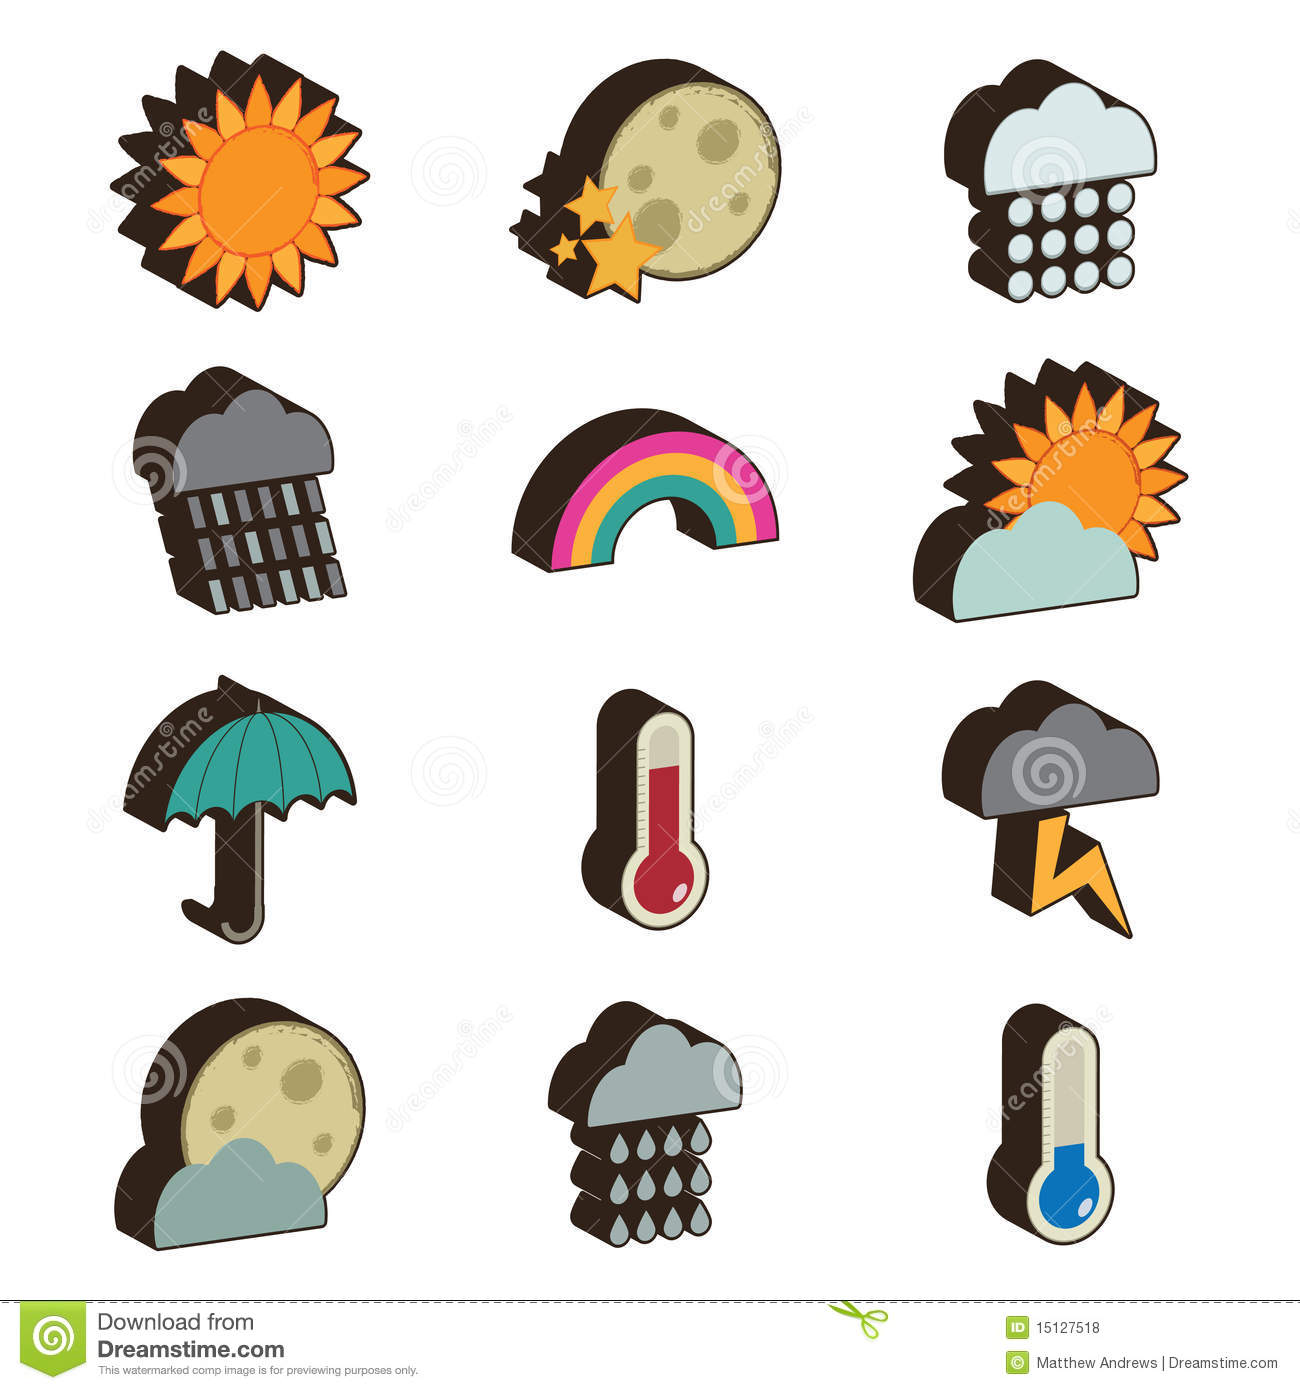 10 3D Weather Icons For Desktop Images